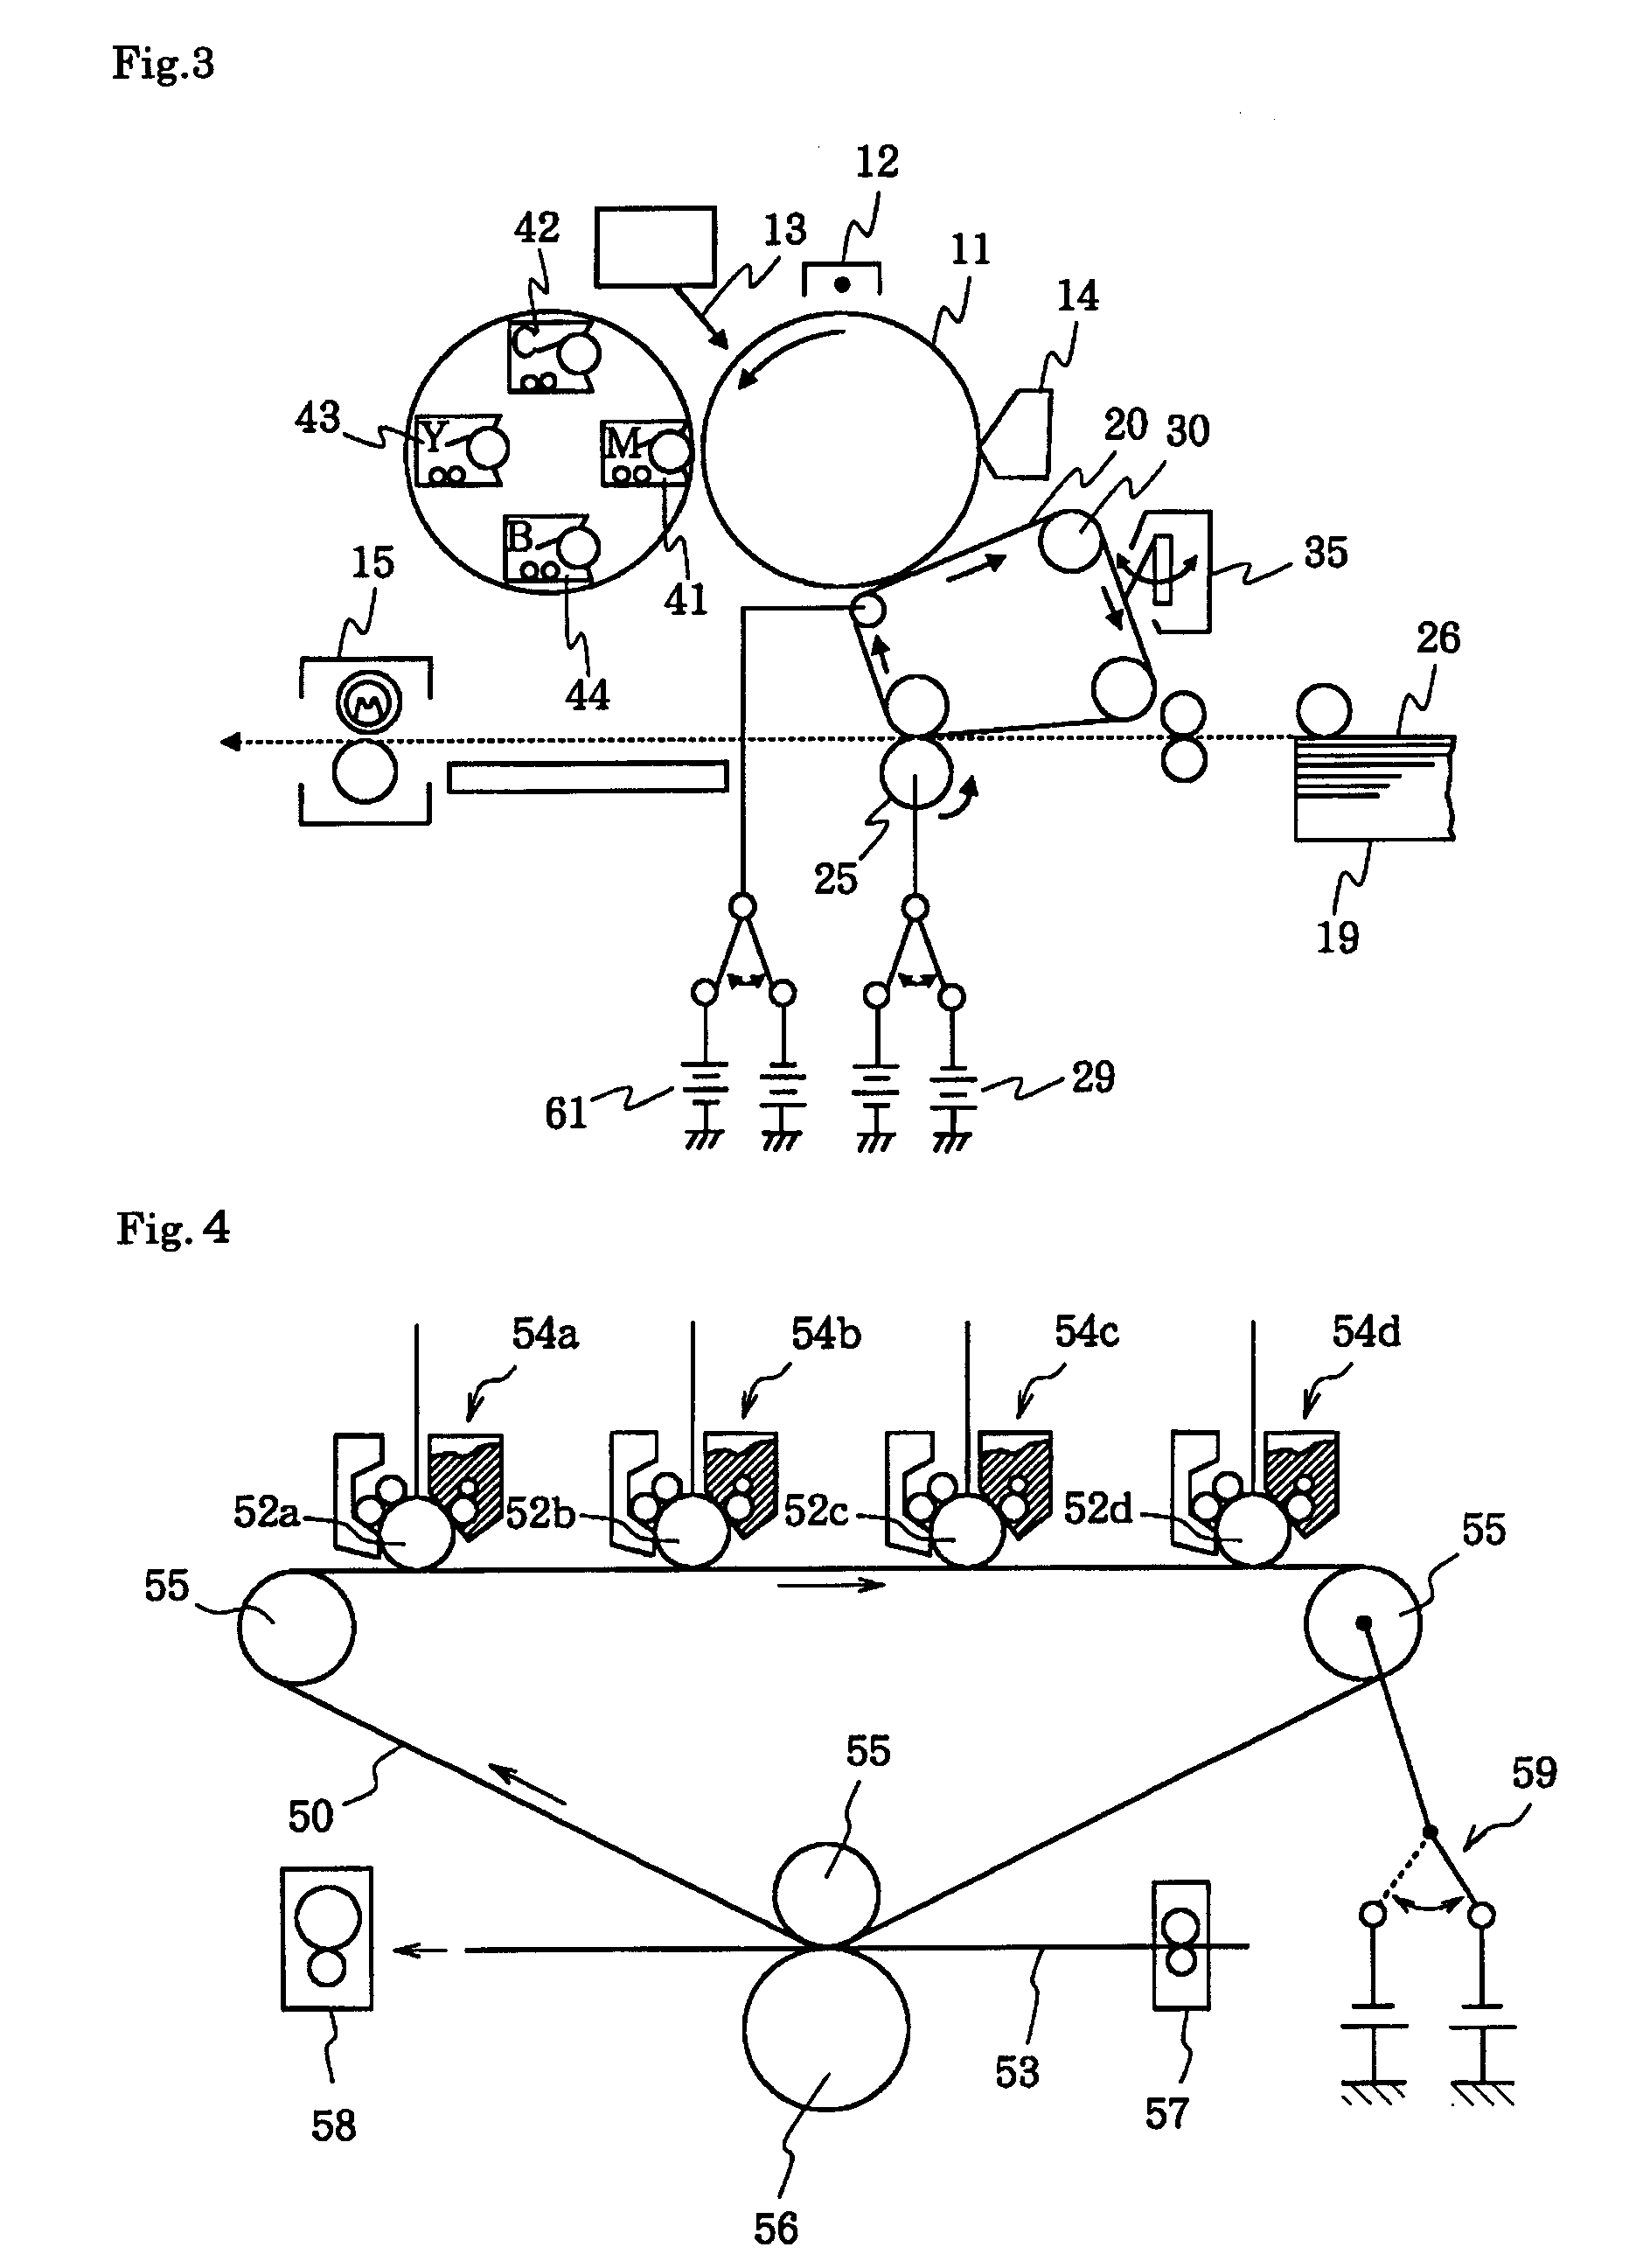 Conductive Endless Belt, Method For Producing Same, And Image Forming Apparatus Employing Same